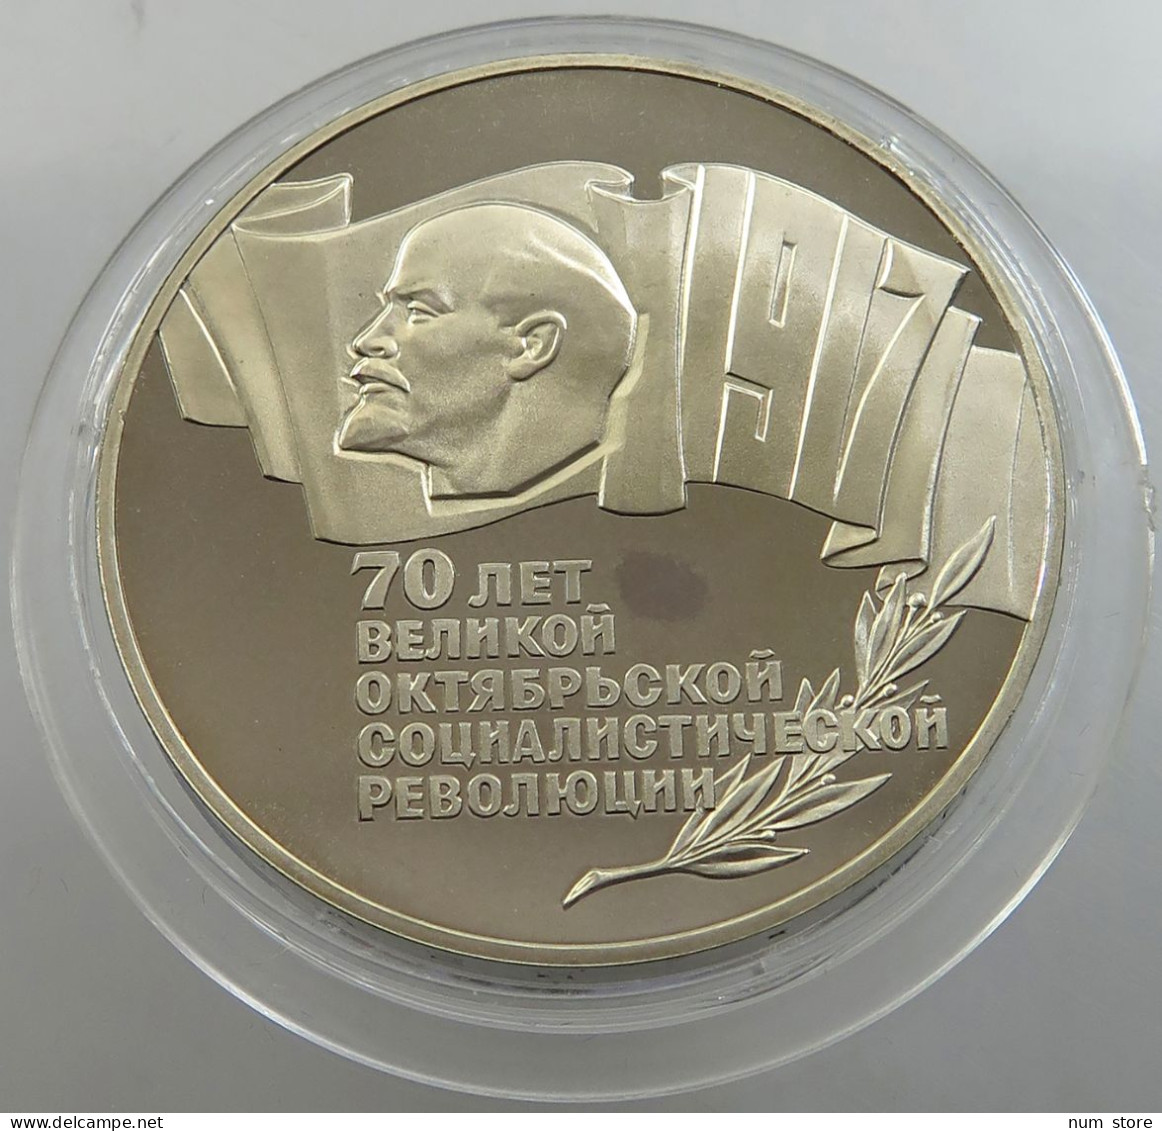 RUSSIA USSR 5 ROUBLES 1987 October Revolution 70th Anniversary PROOF #sm14 0351 - Russland